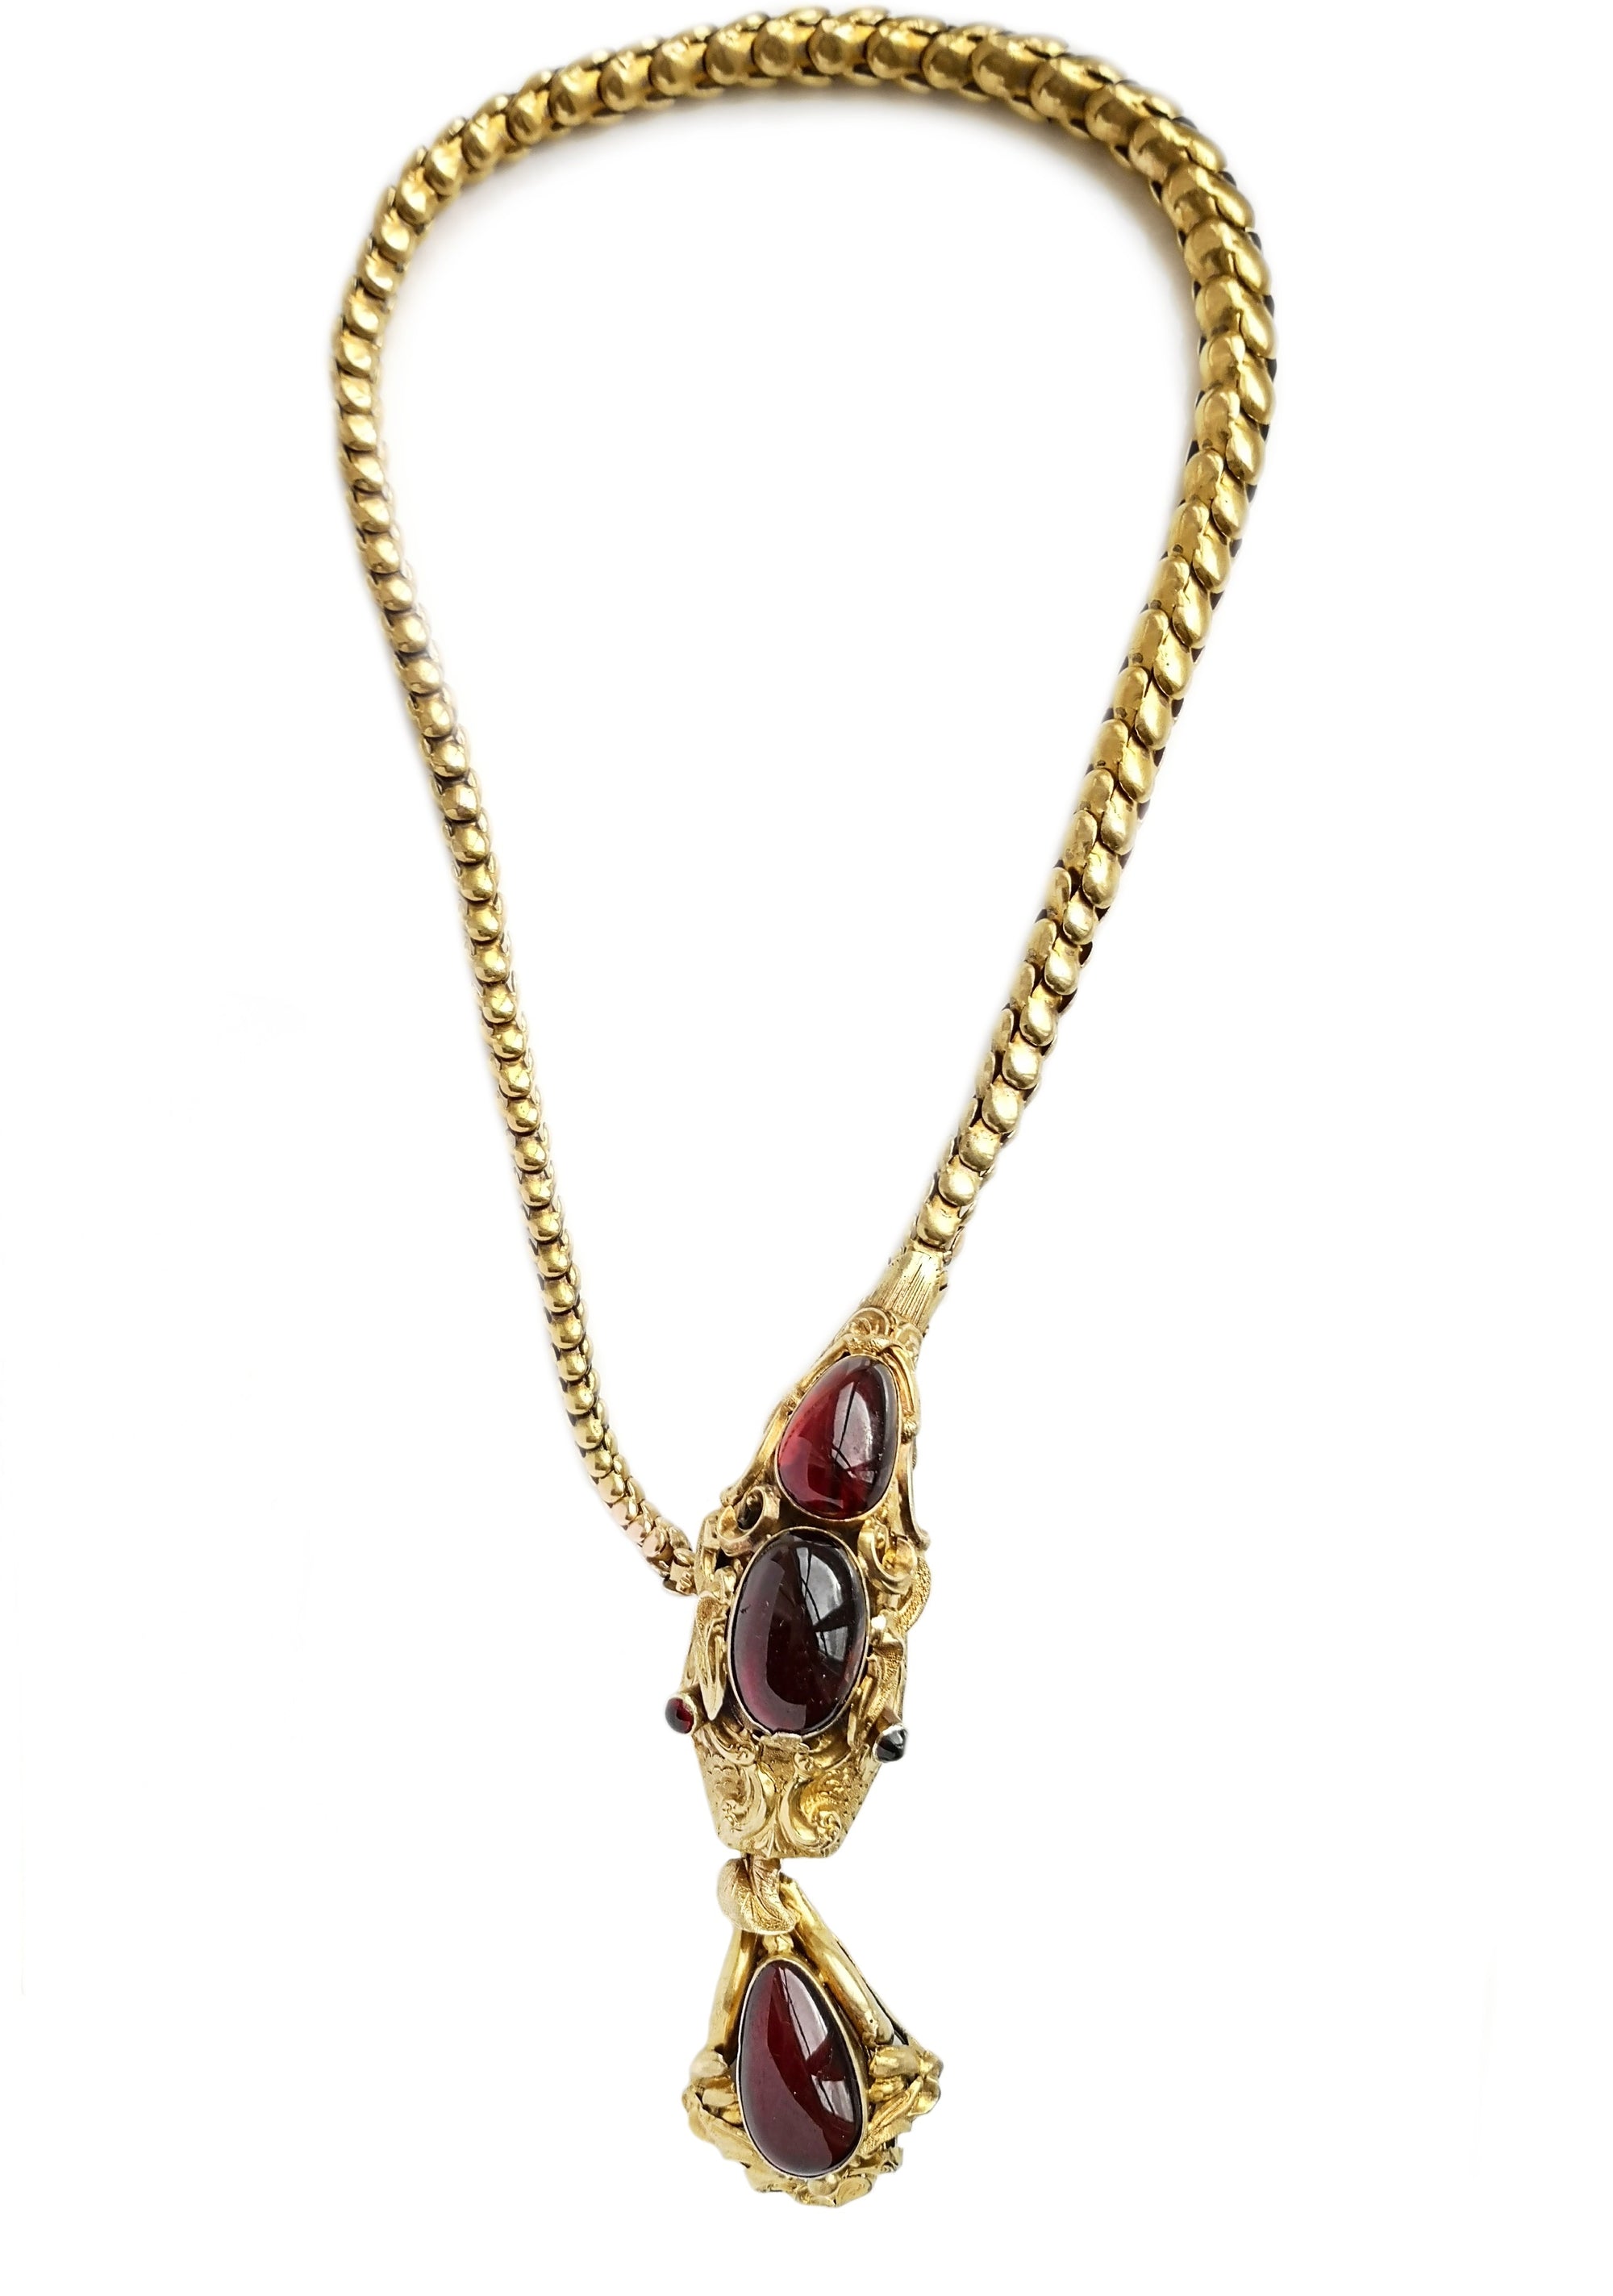 Victorian Snake / Serpent Necklace in 18k Gold set with Garnets